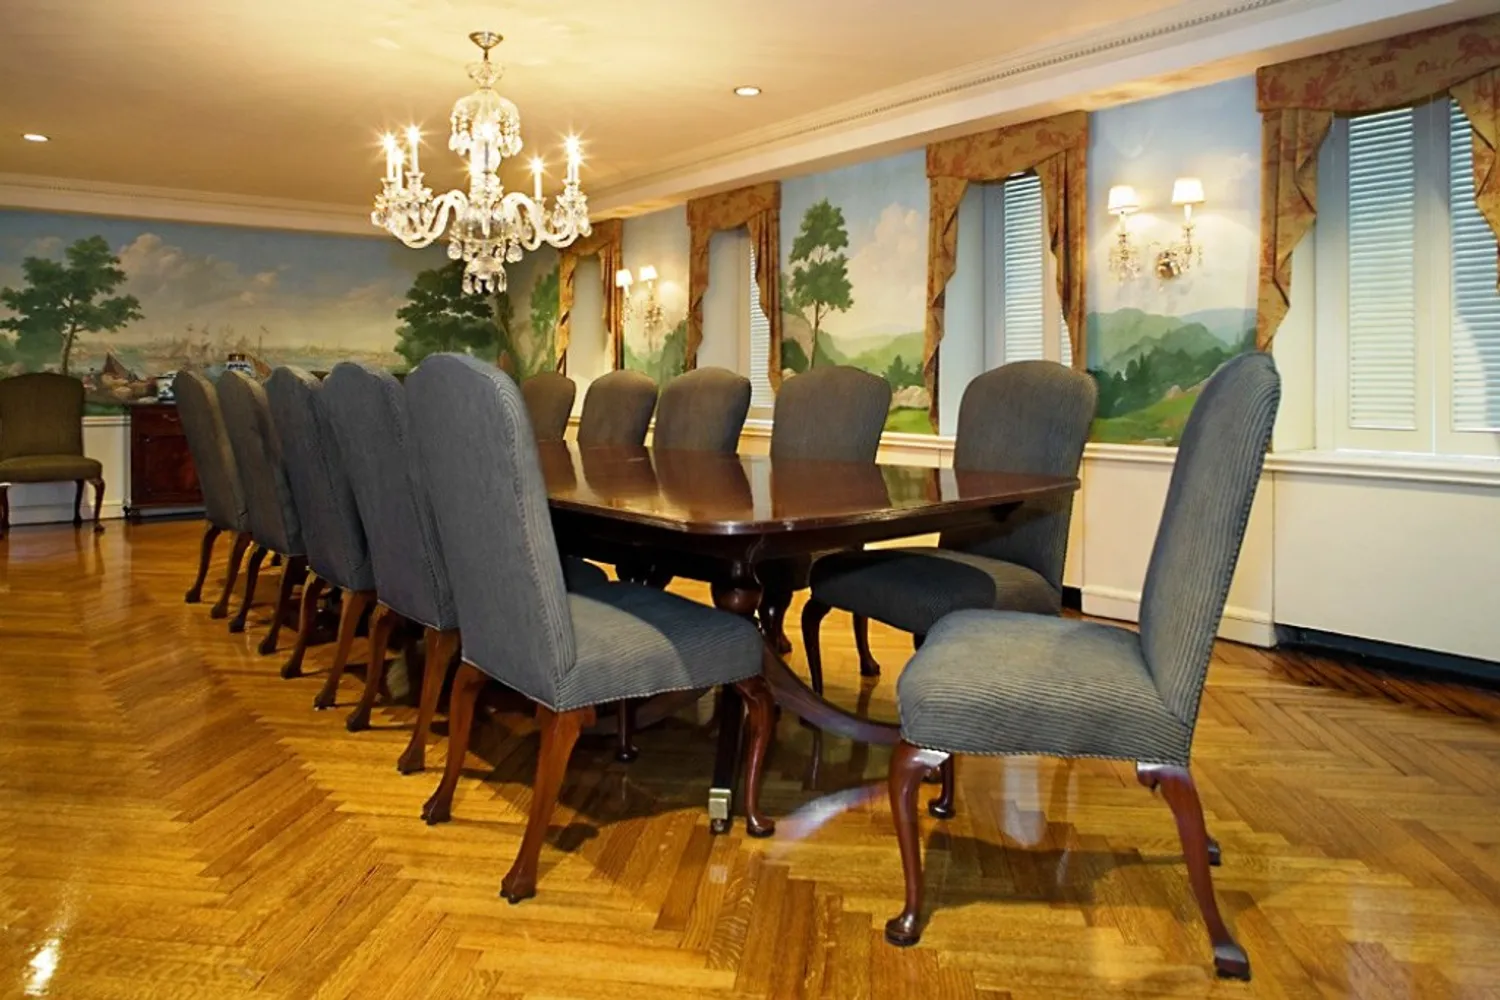 Owner dining room available for formal gatherings